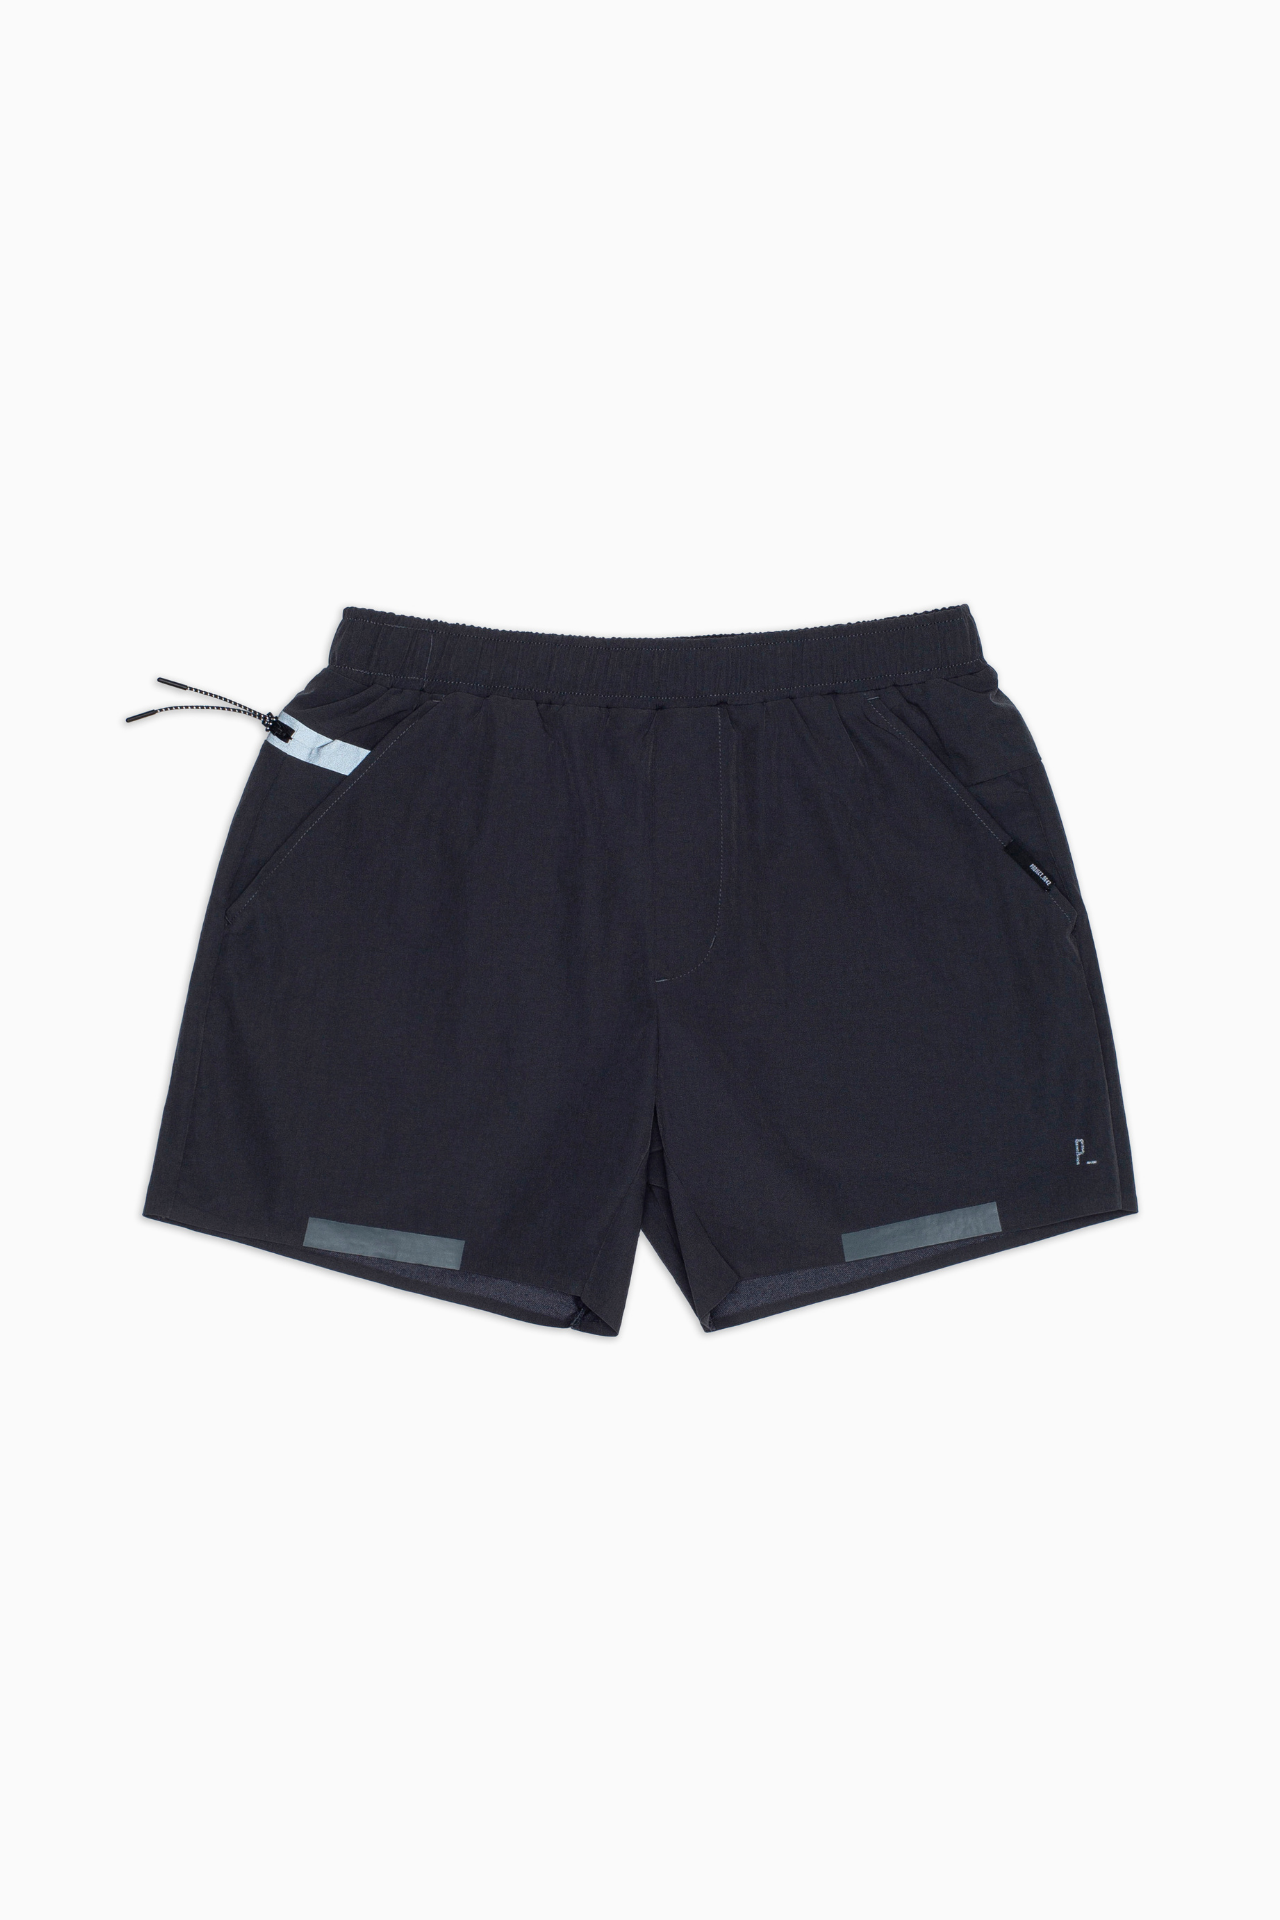 03 / Lined Shorts